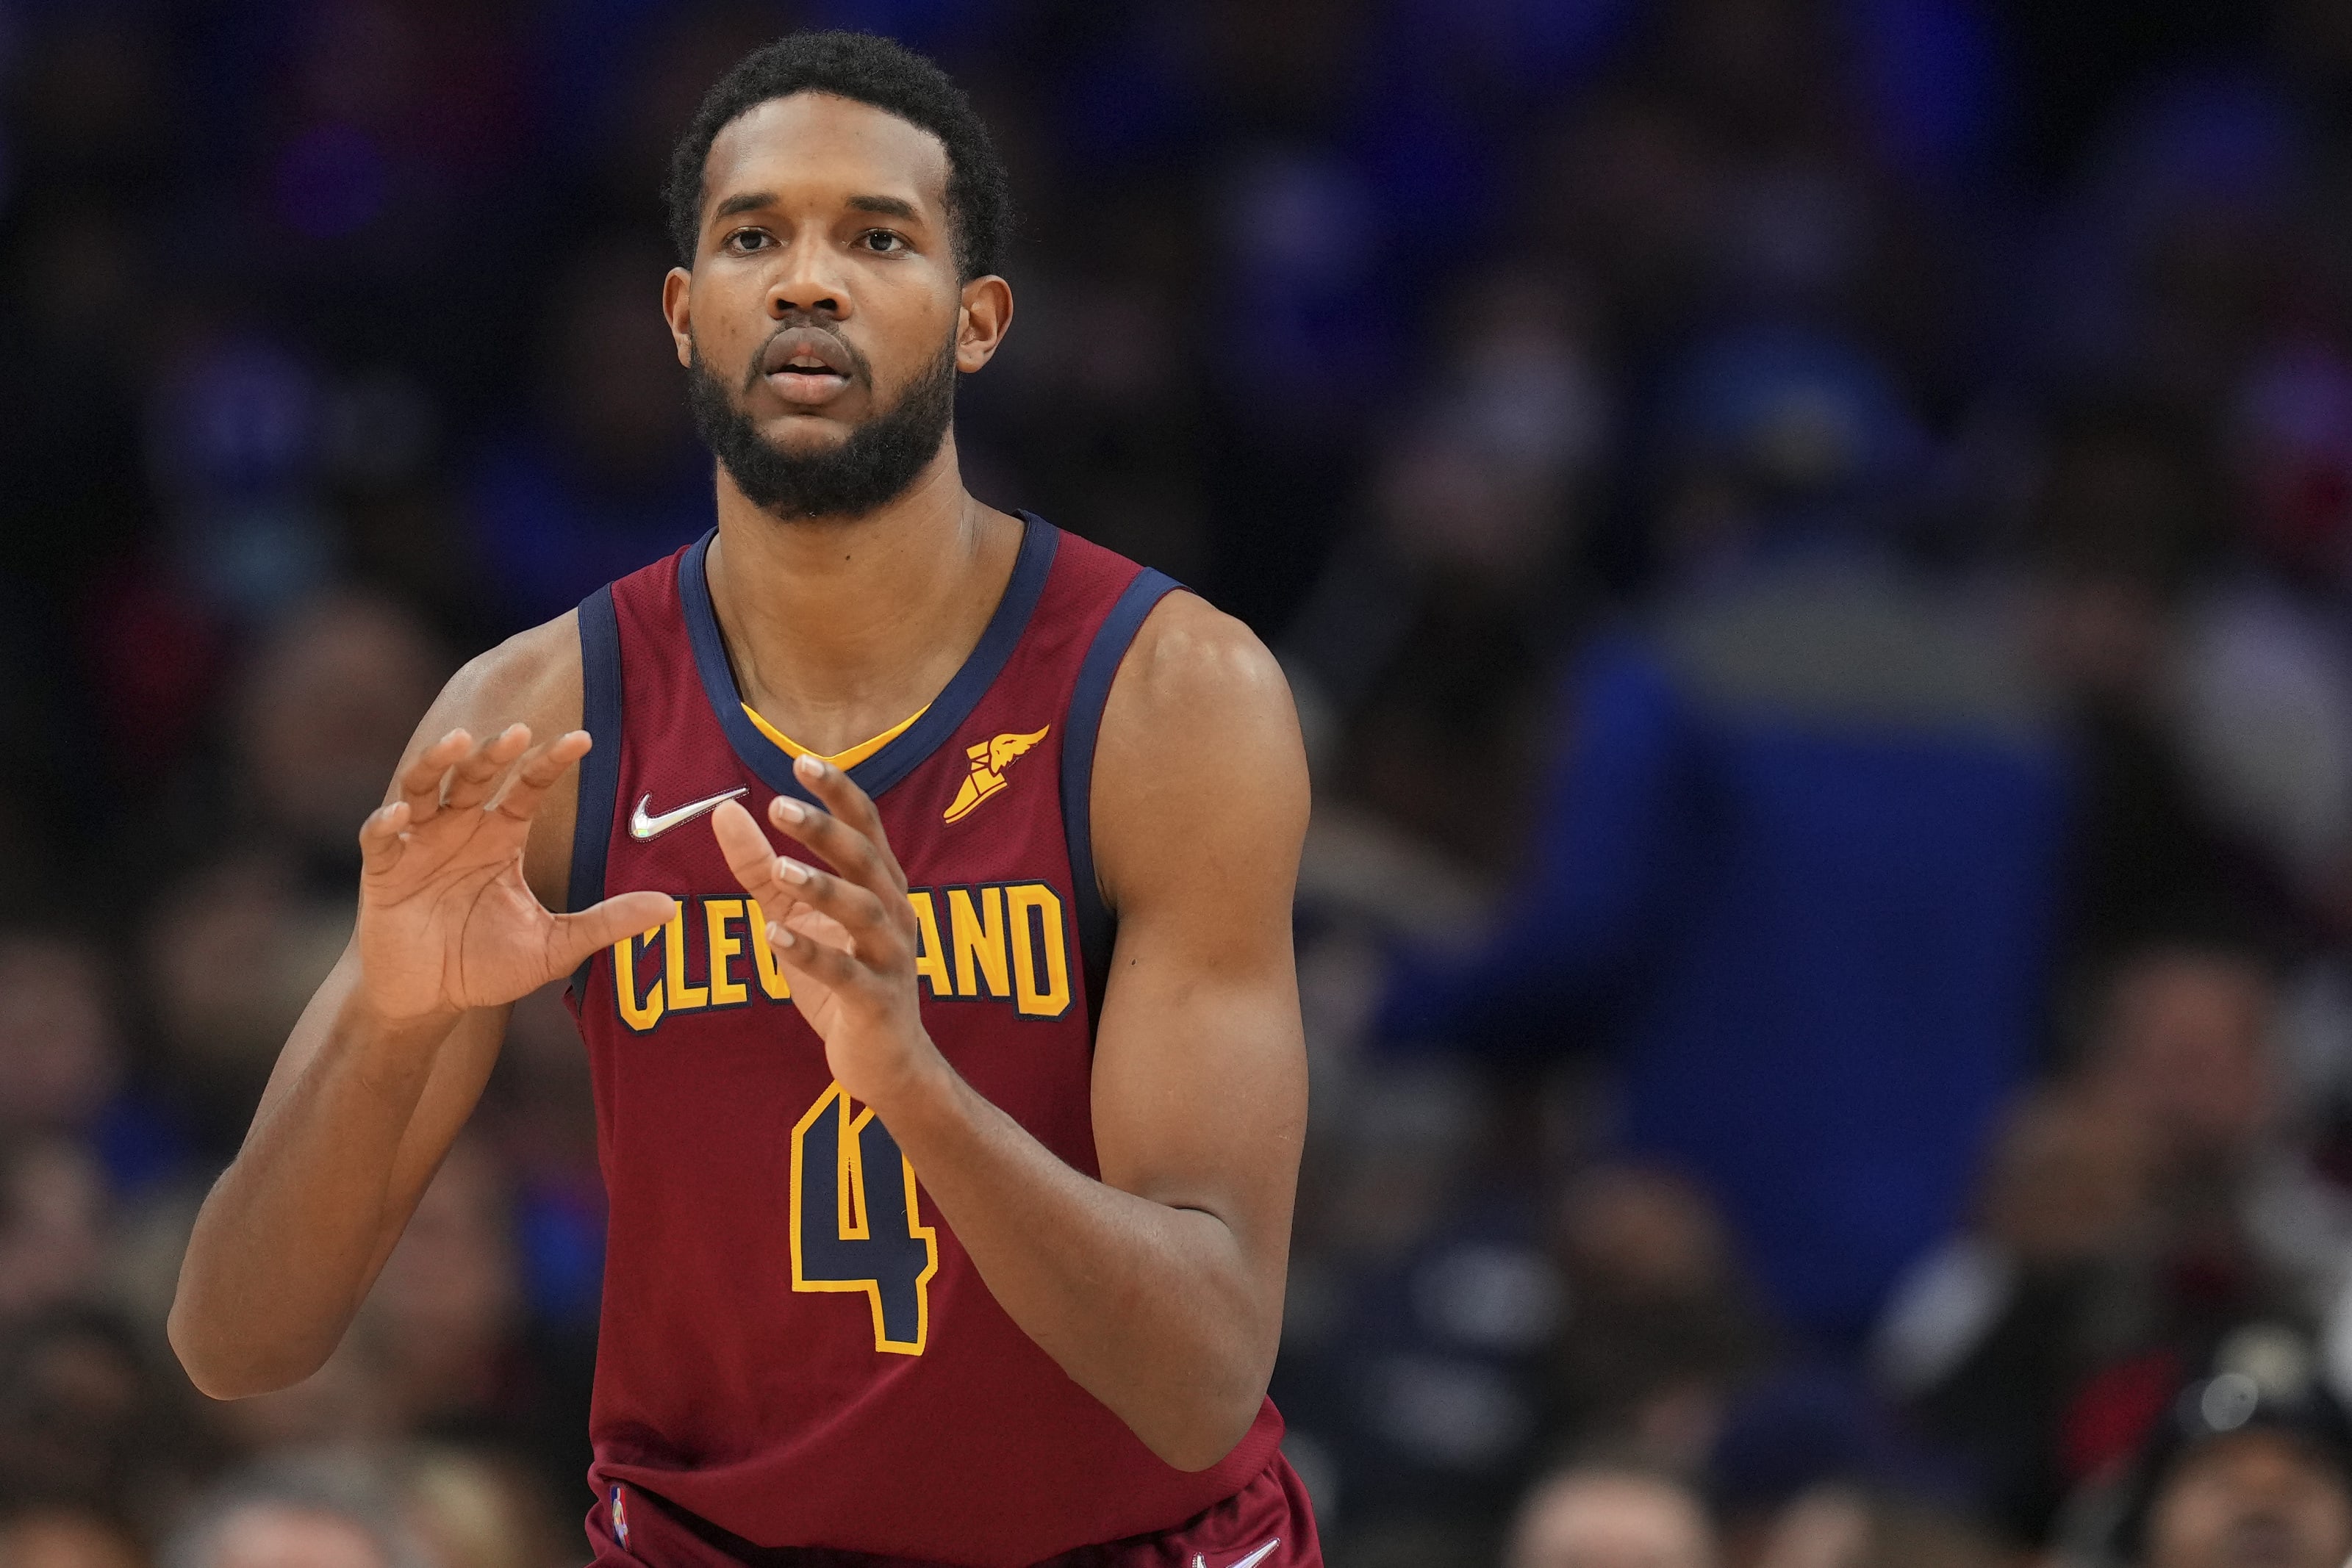 New Clip, The moment Evan Mobley's name was called. ❤💛, By Cleveland  Cavaliers